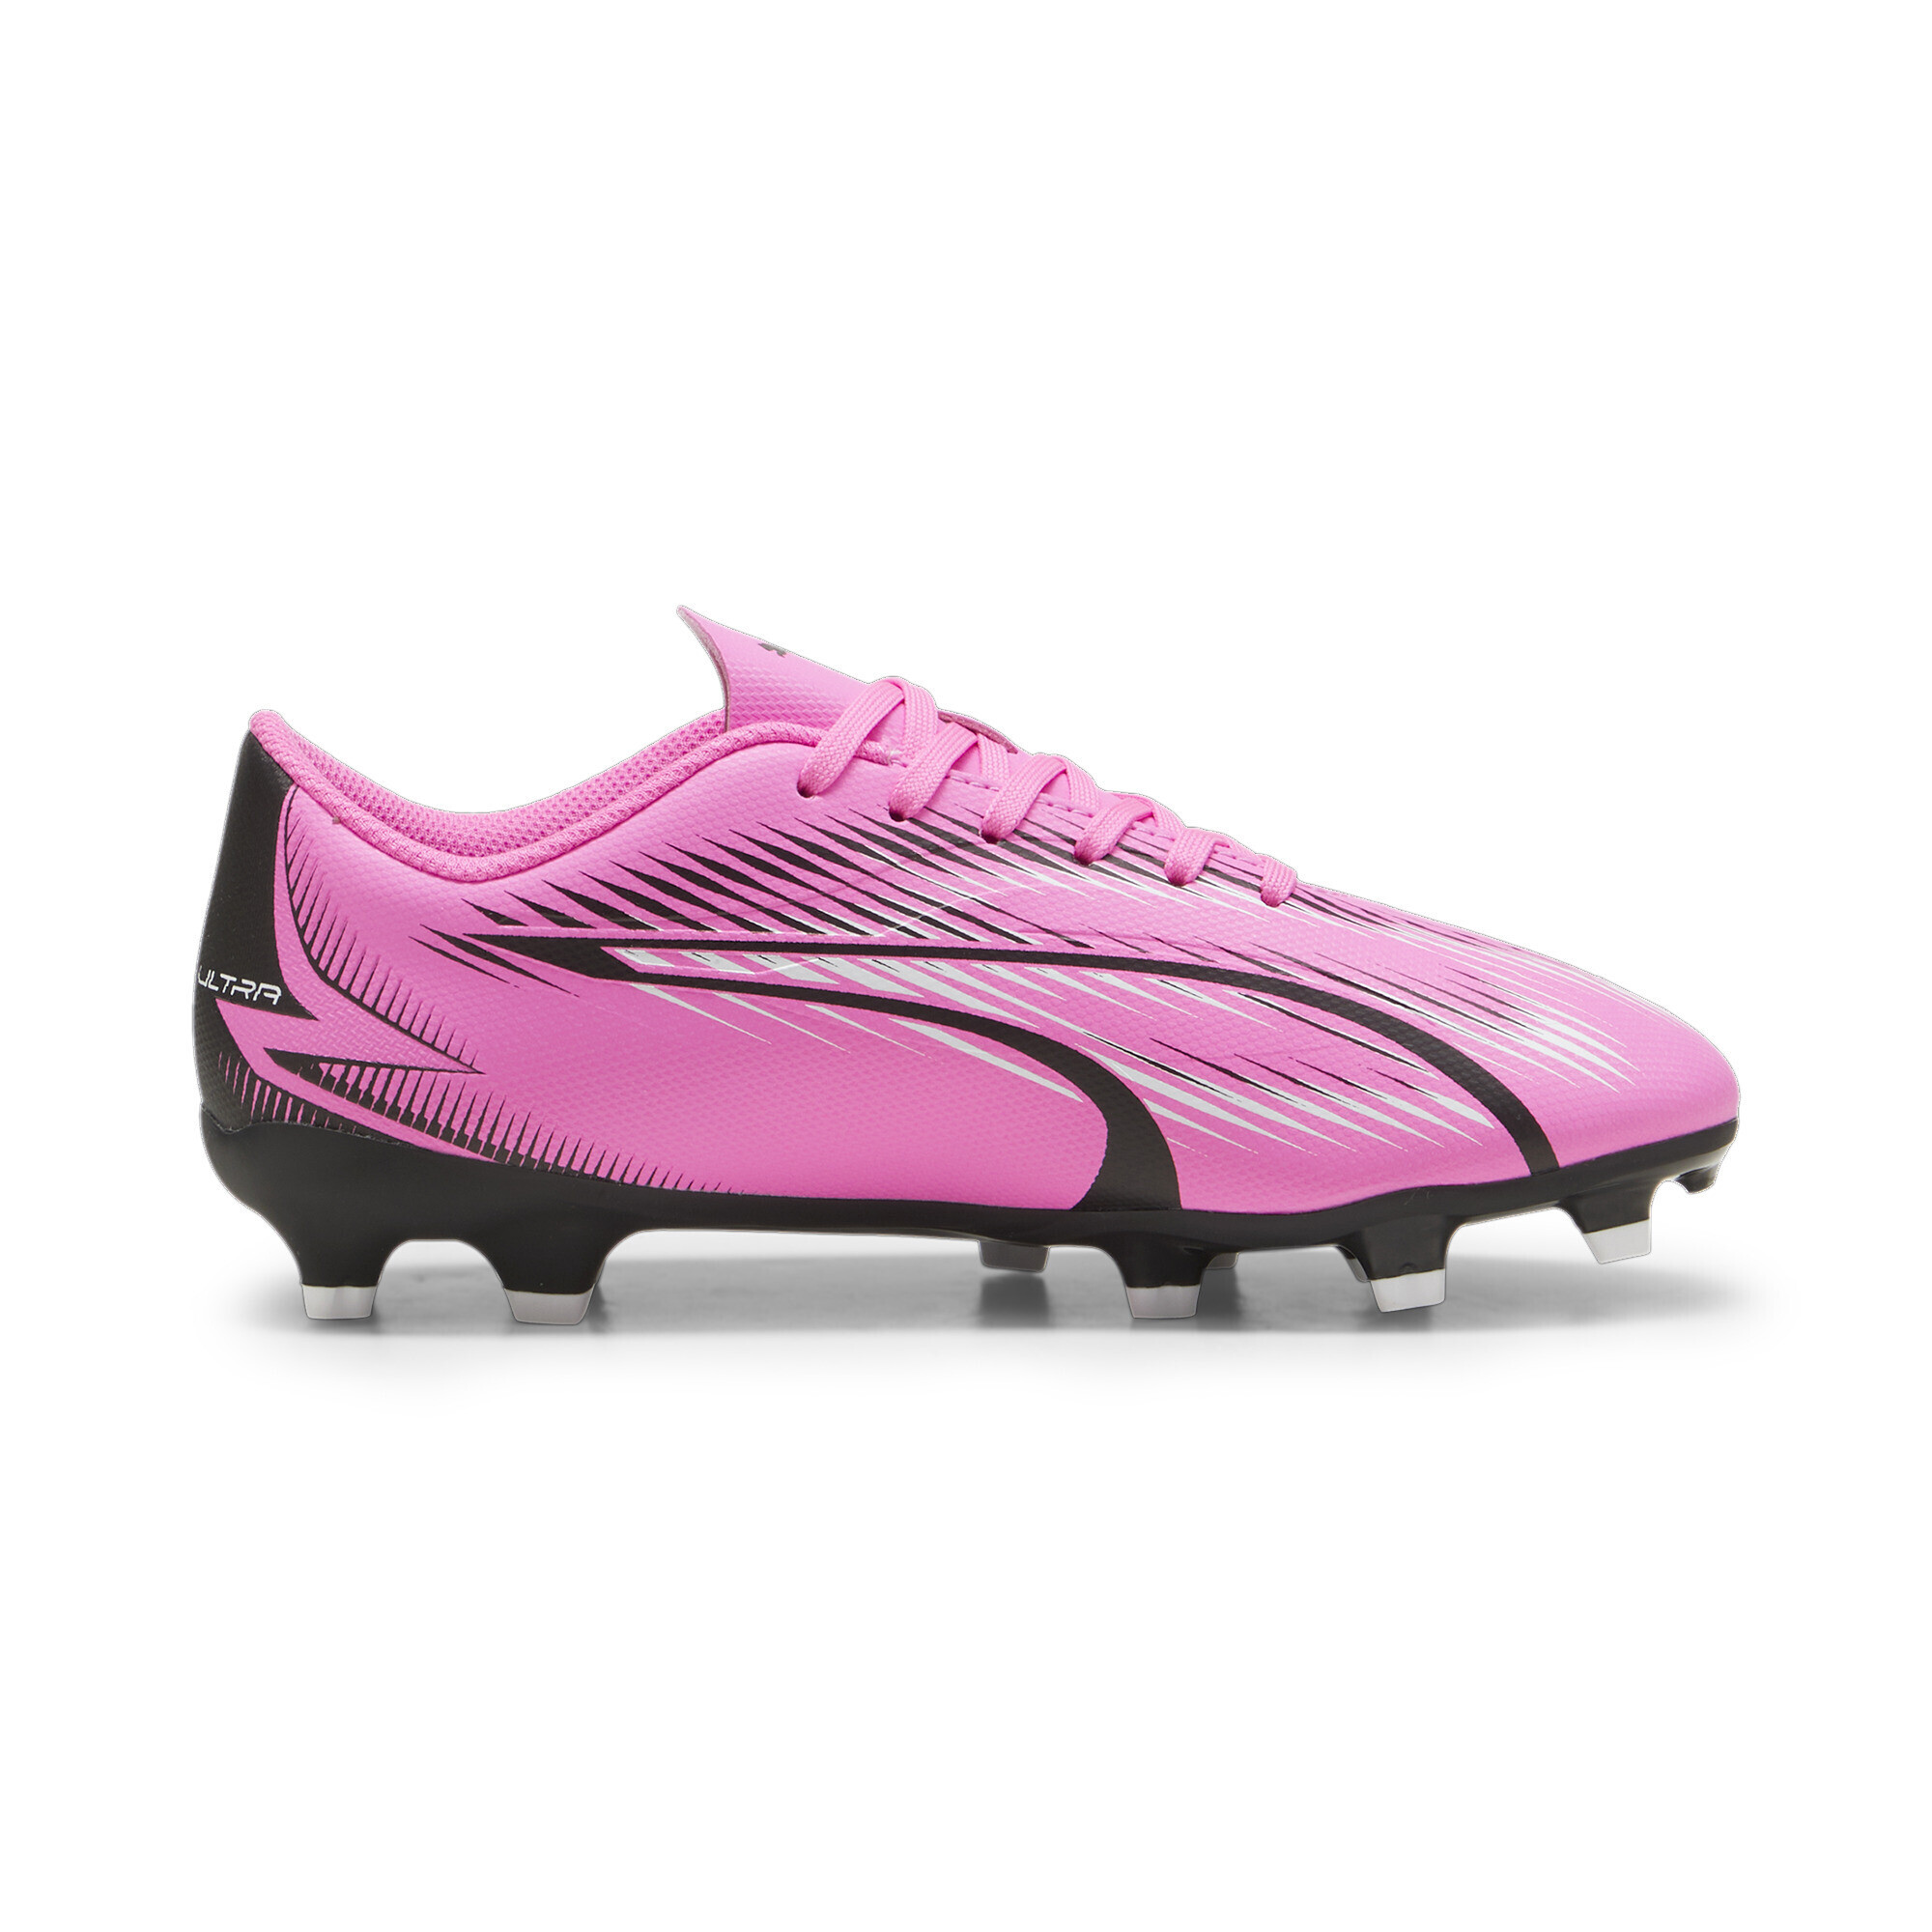 PUMA ULTRA PLAY FG/AG Youth Football Boots In Pink, Size EU 38.5